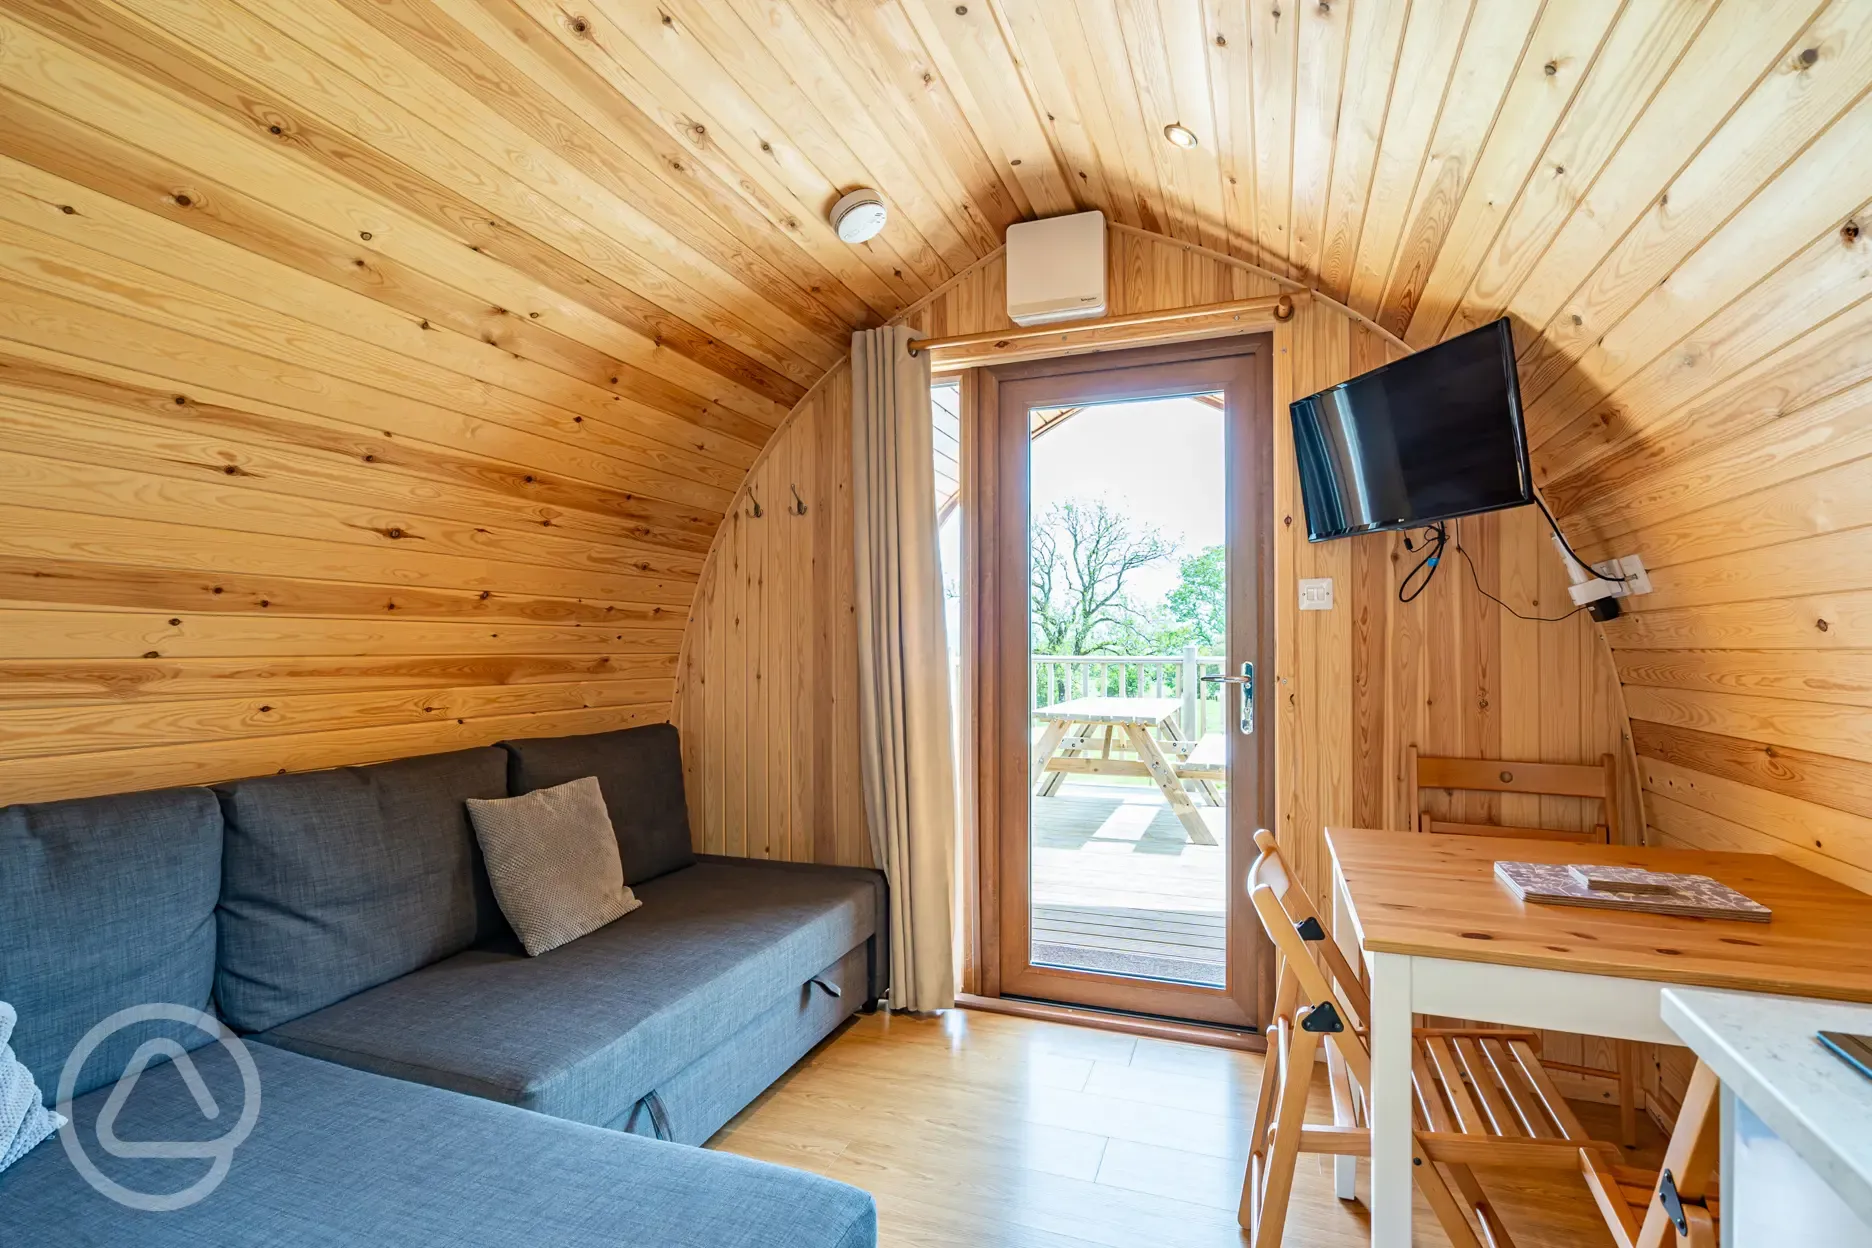 Camping pod with bunk beds living area